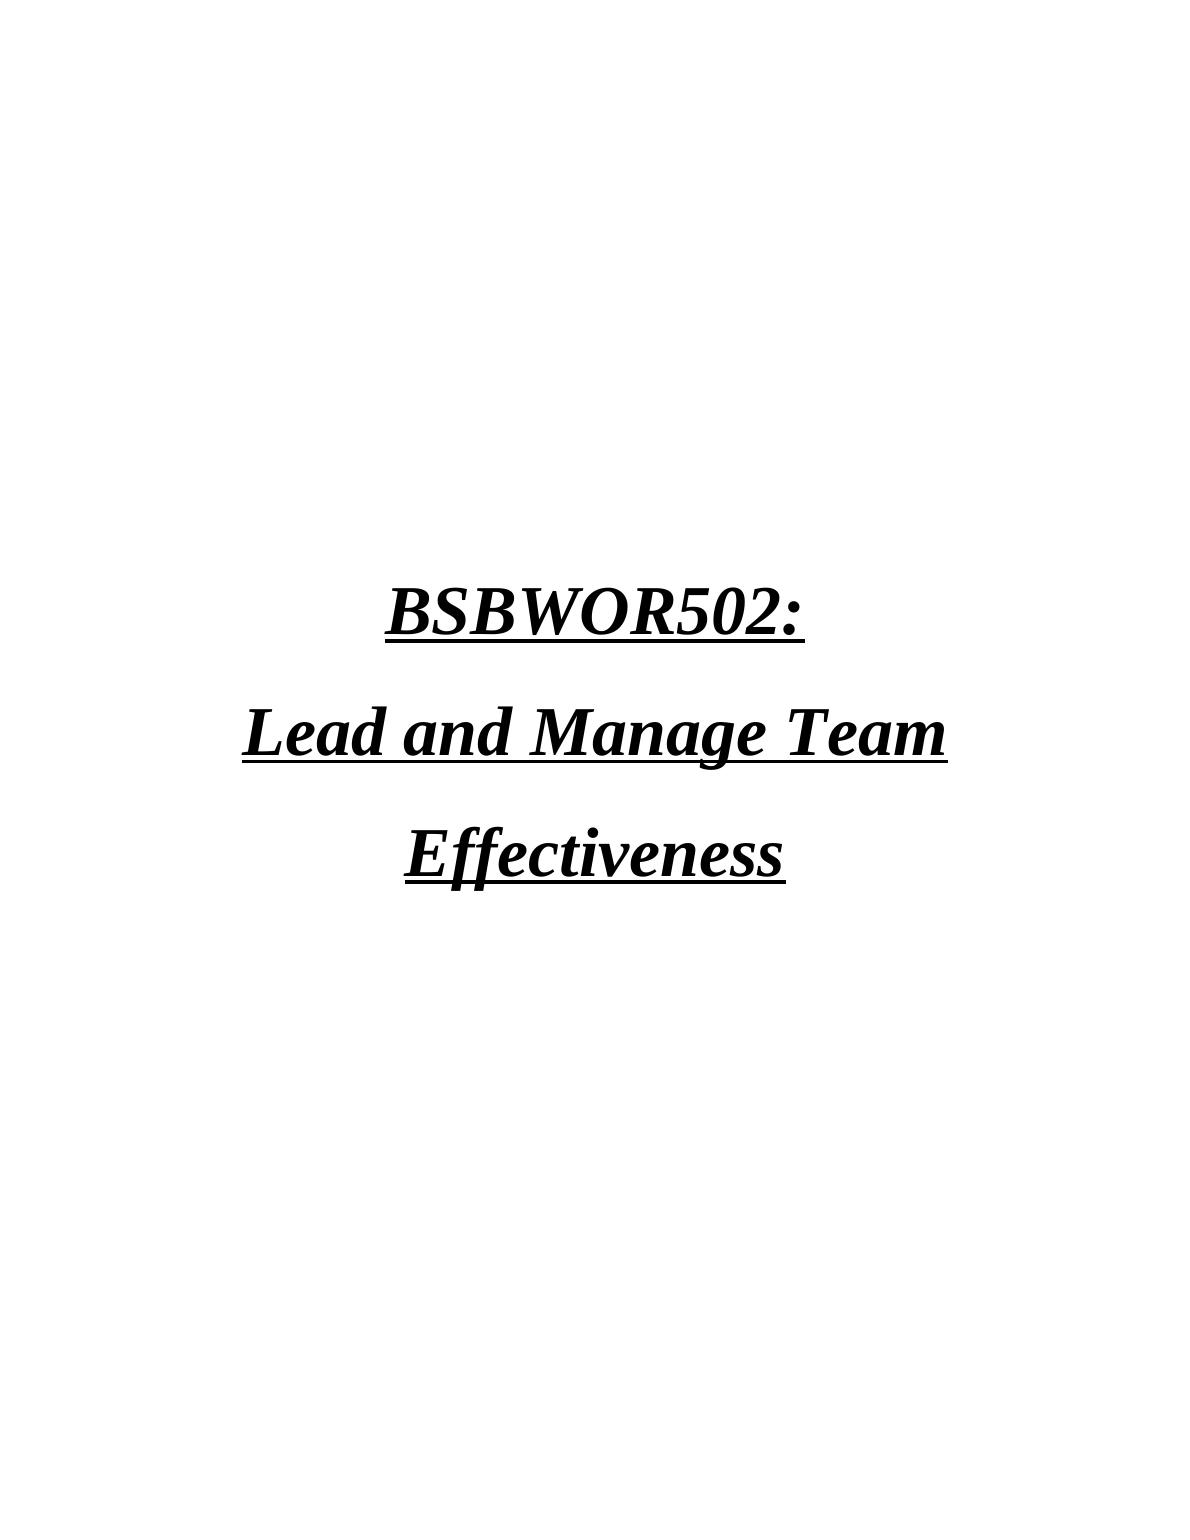 BSBWOR502: Lead and Manage Team Effectiveness_1